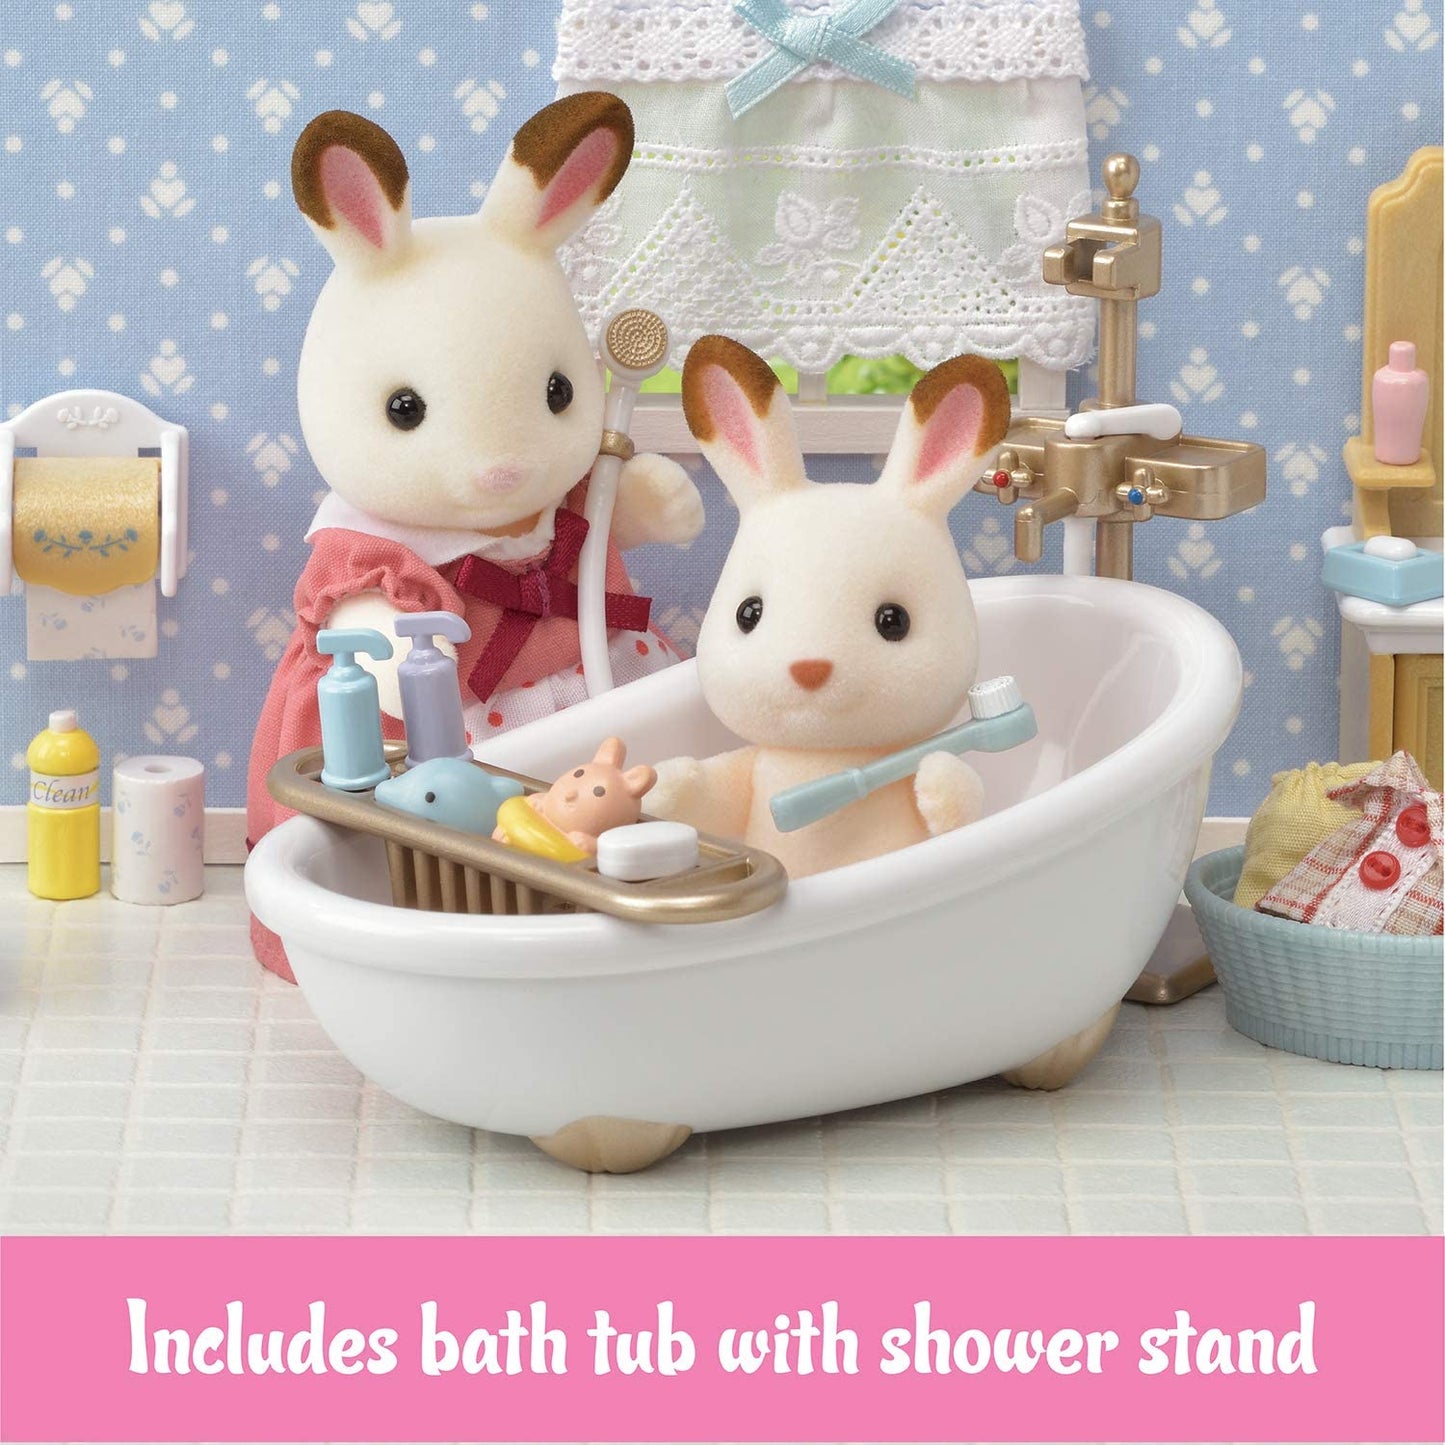 Calico Critters - Country Bathroom Set